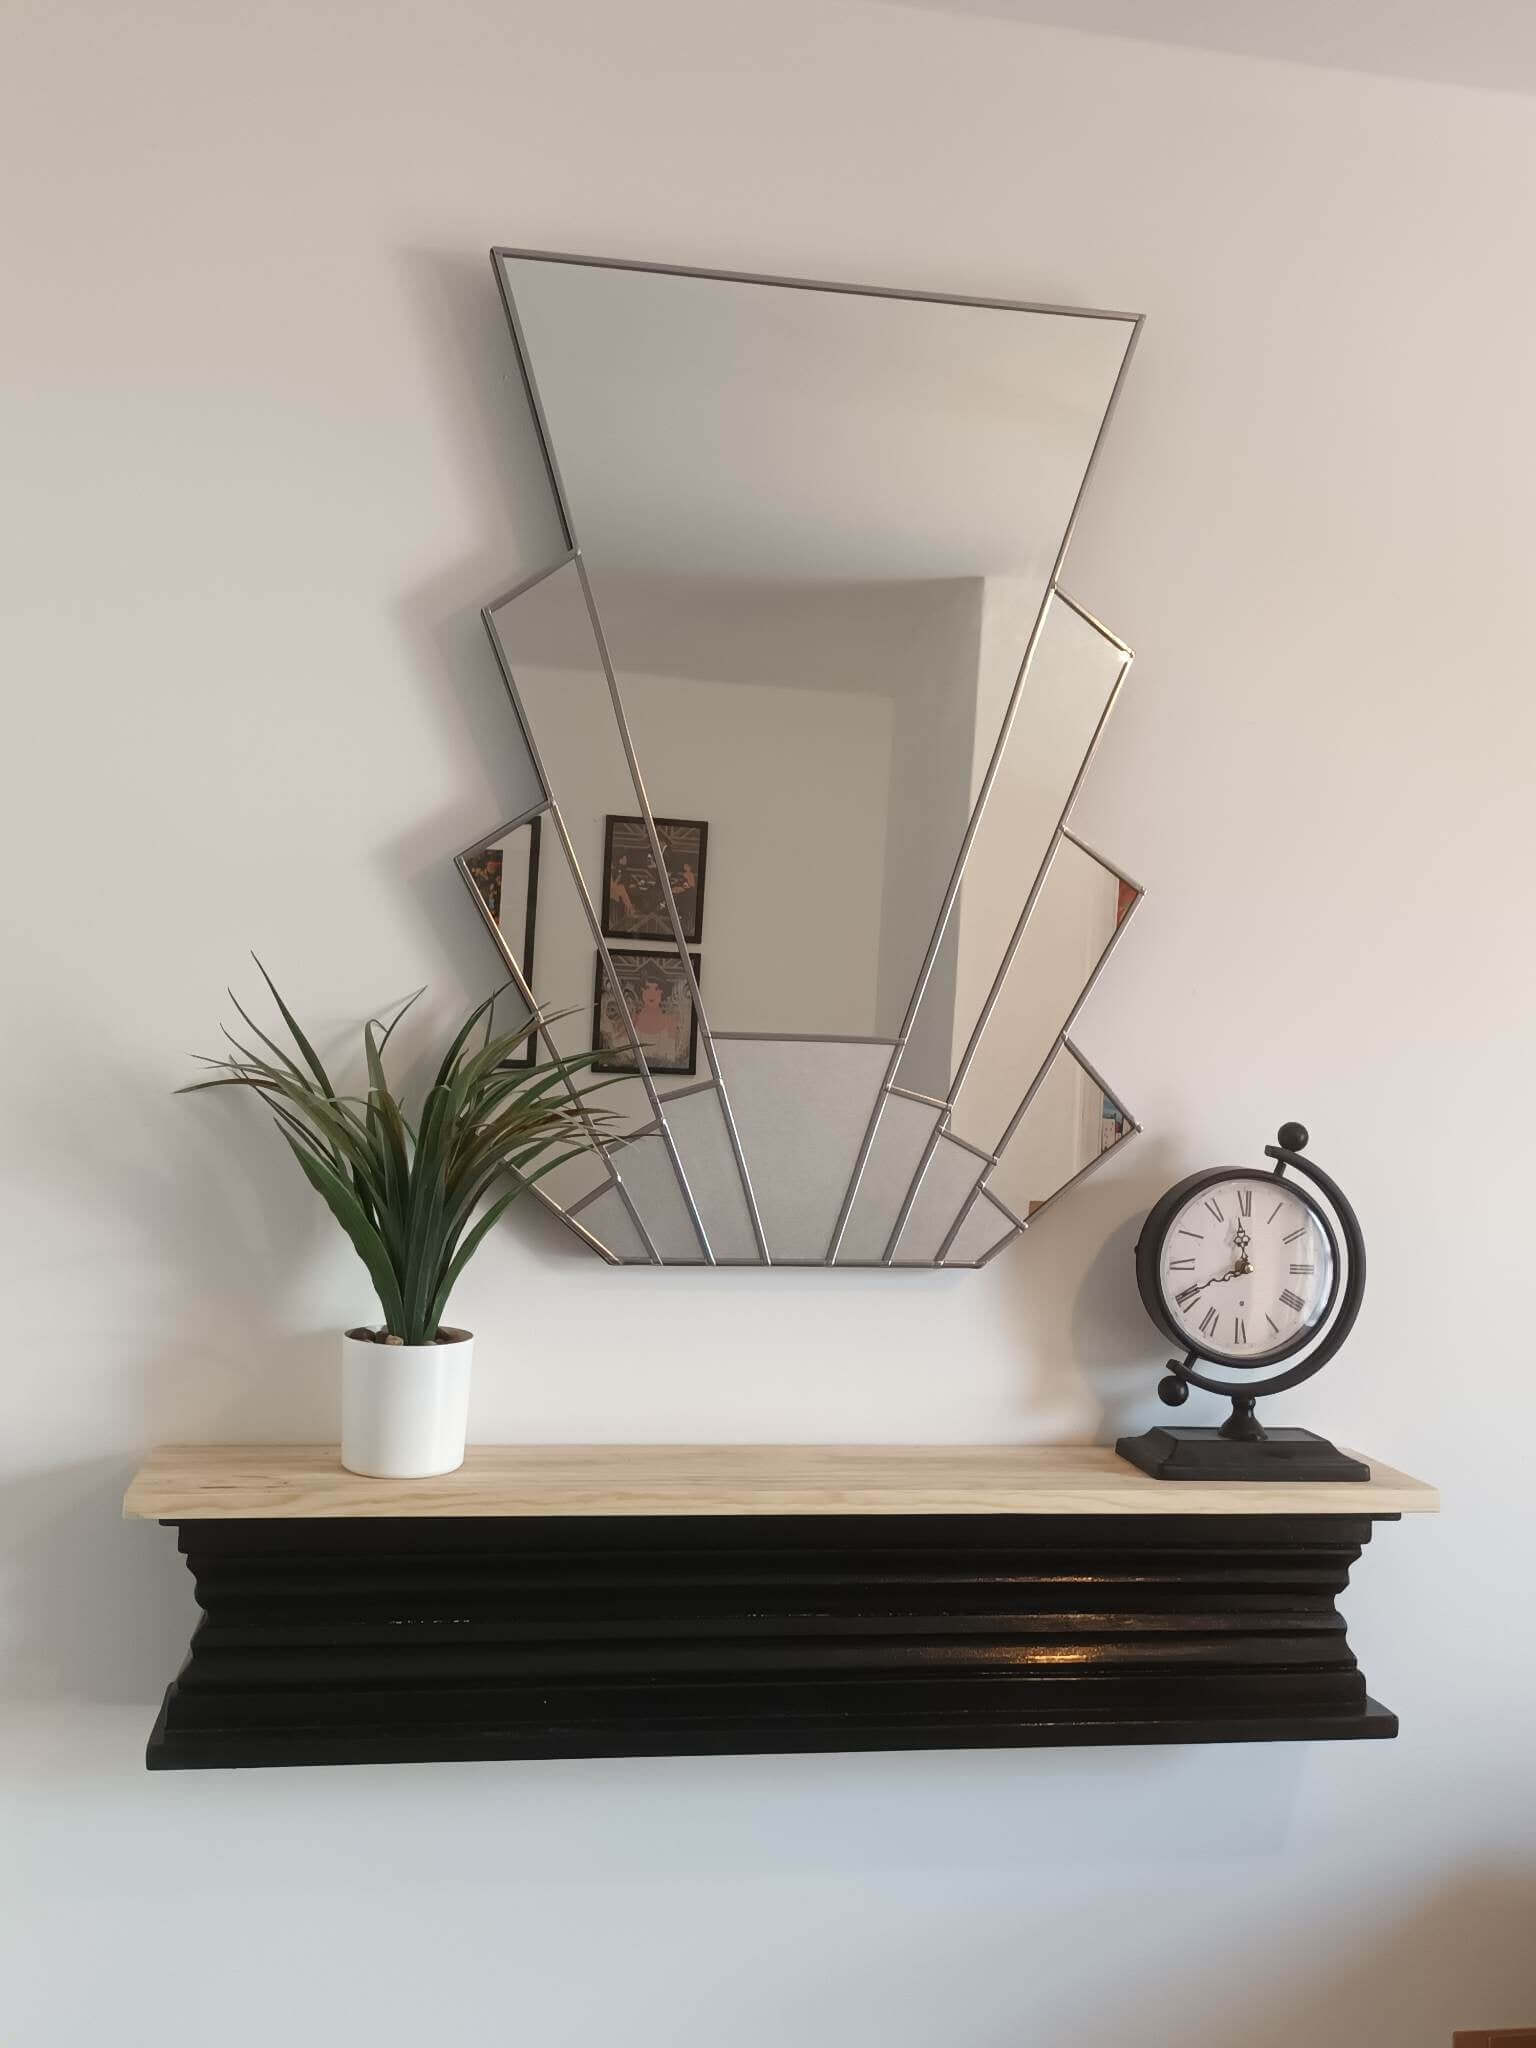 Large Art Deco Style Wall Mirror Over Mantle